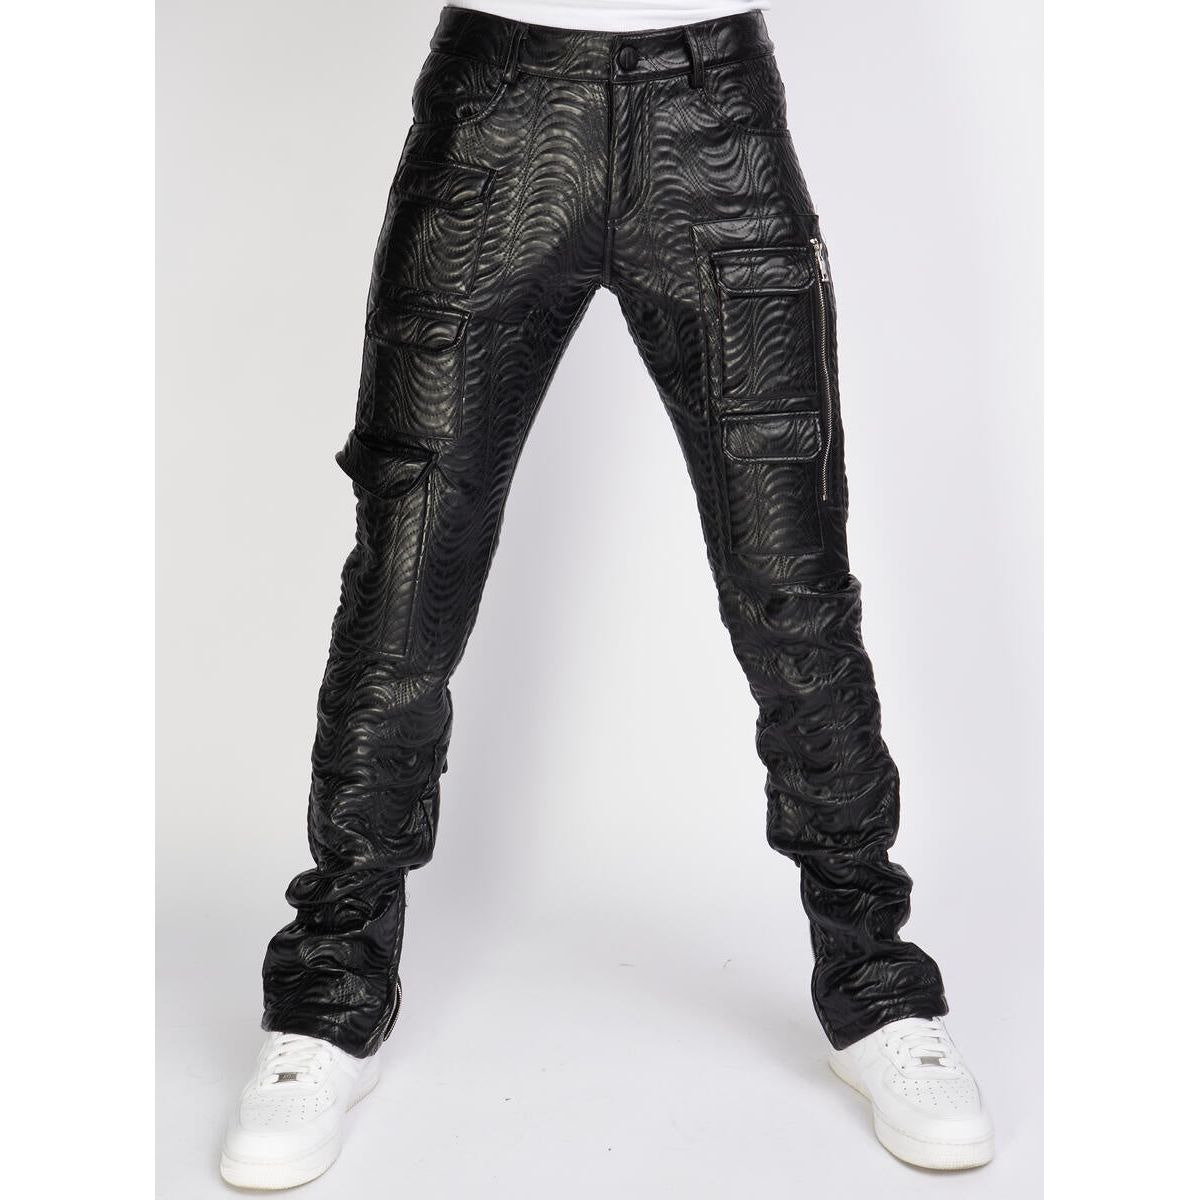 PLTKS Cargo PU Leather Stacked Black Jeans (Murphy551)